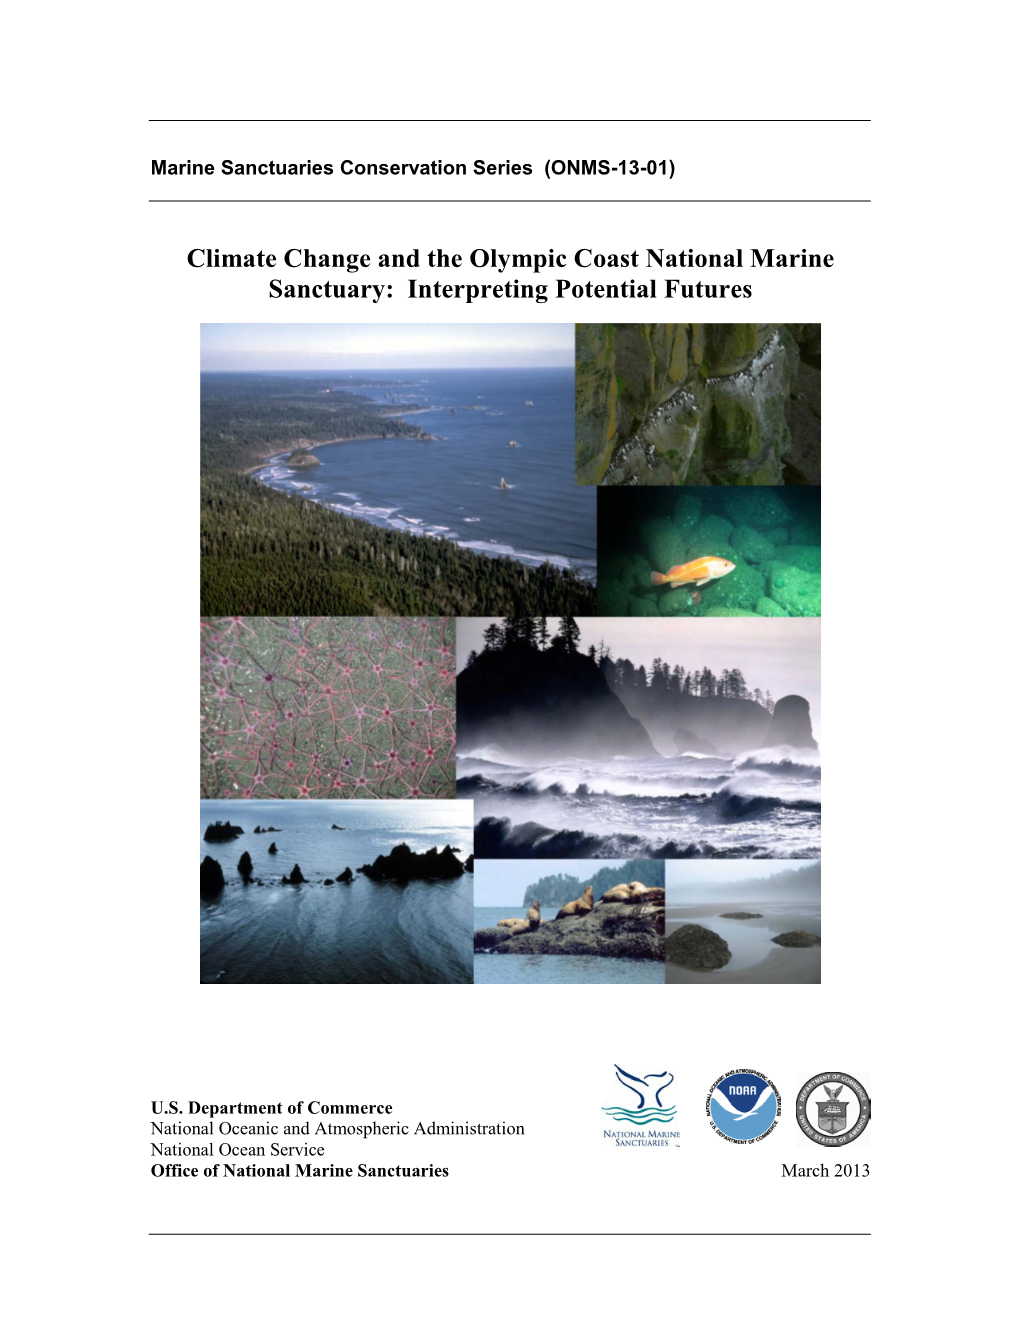 Climate Change and the Olympic Coast National Marine Sanctuary: Interpreting Potential Futures